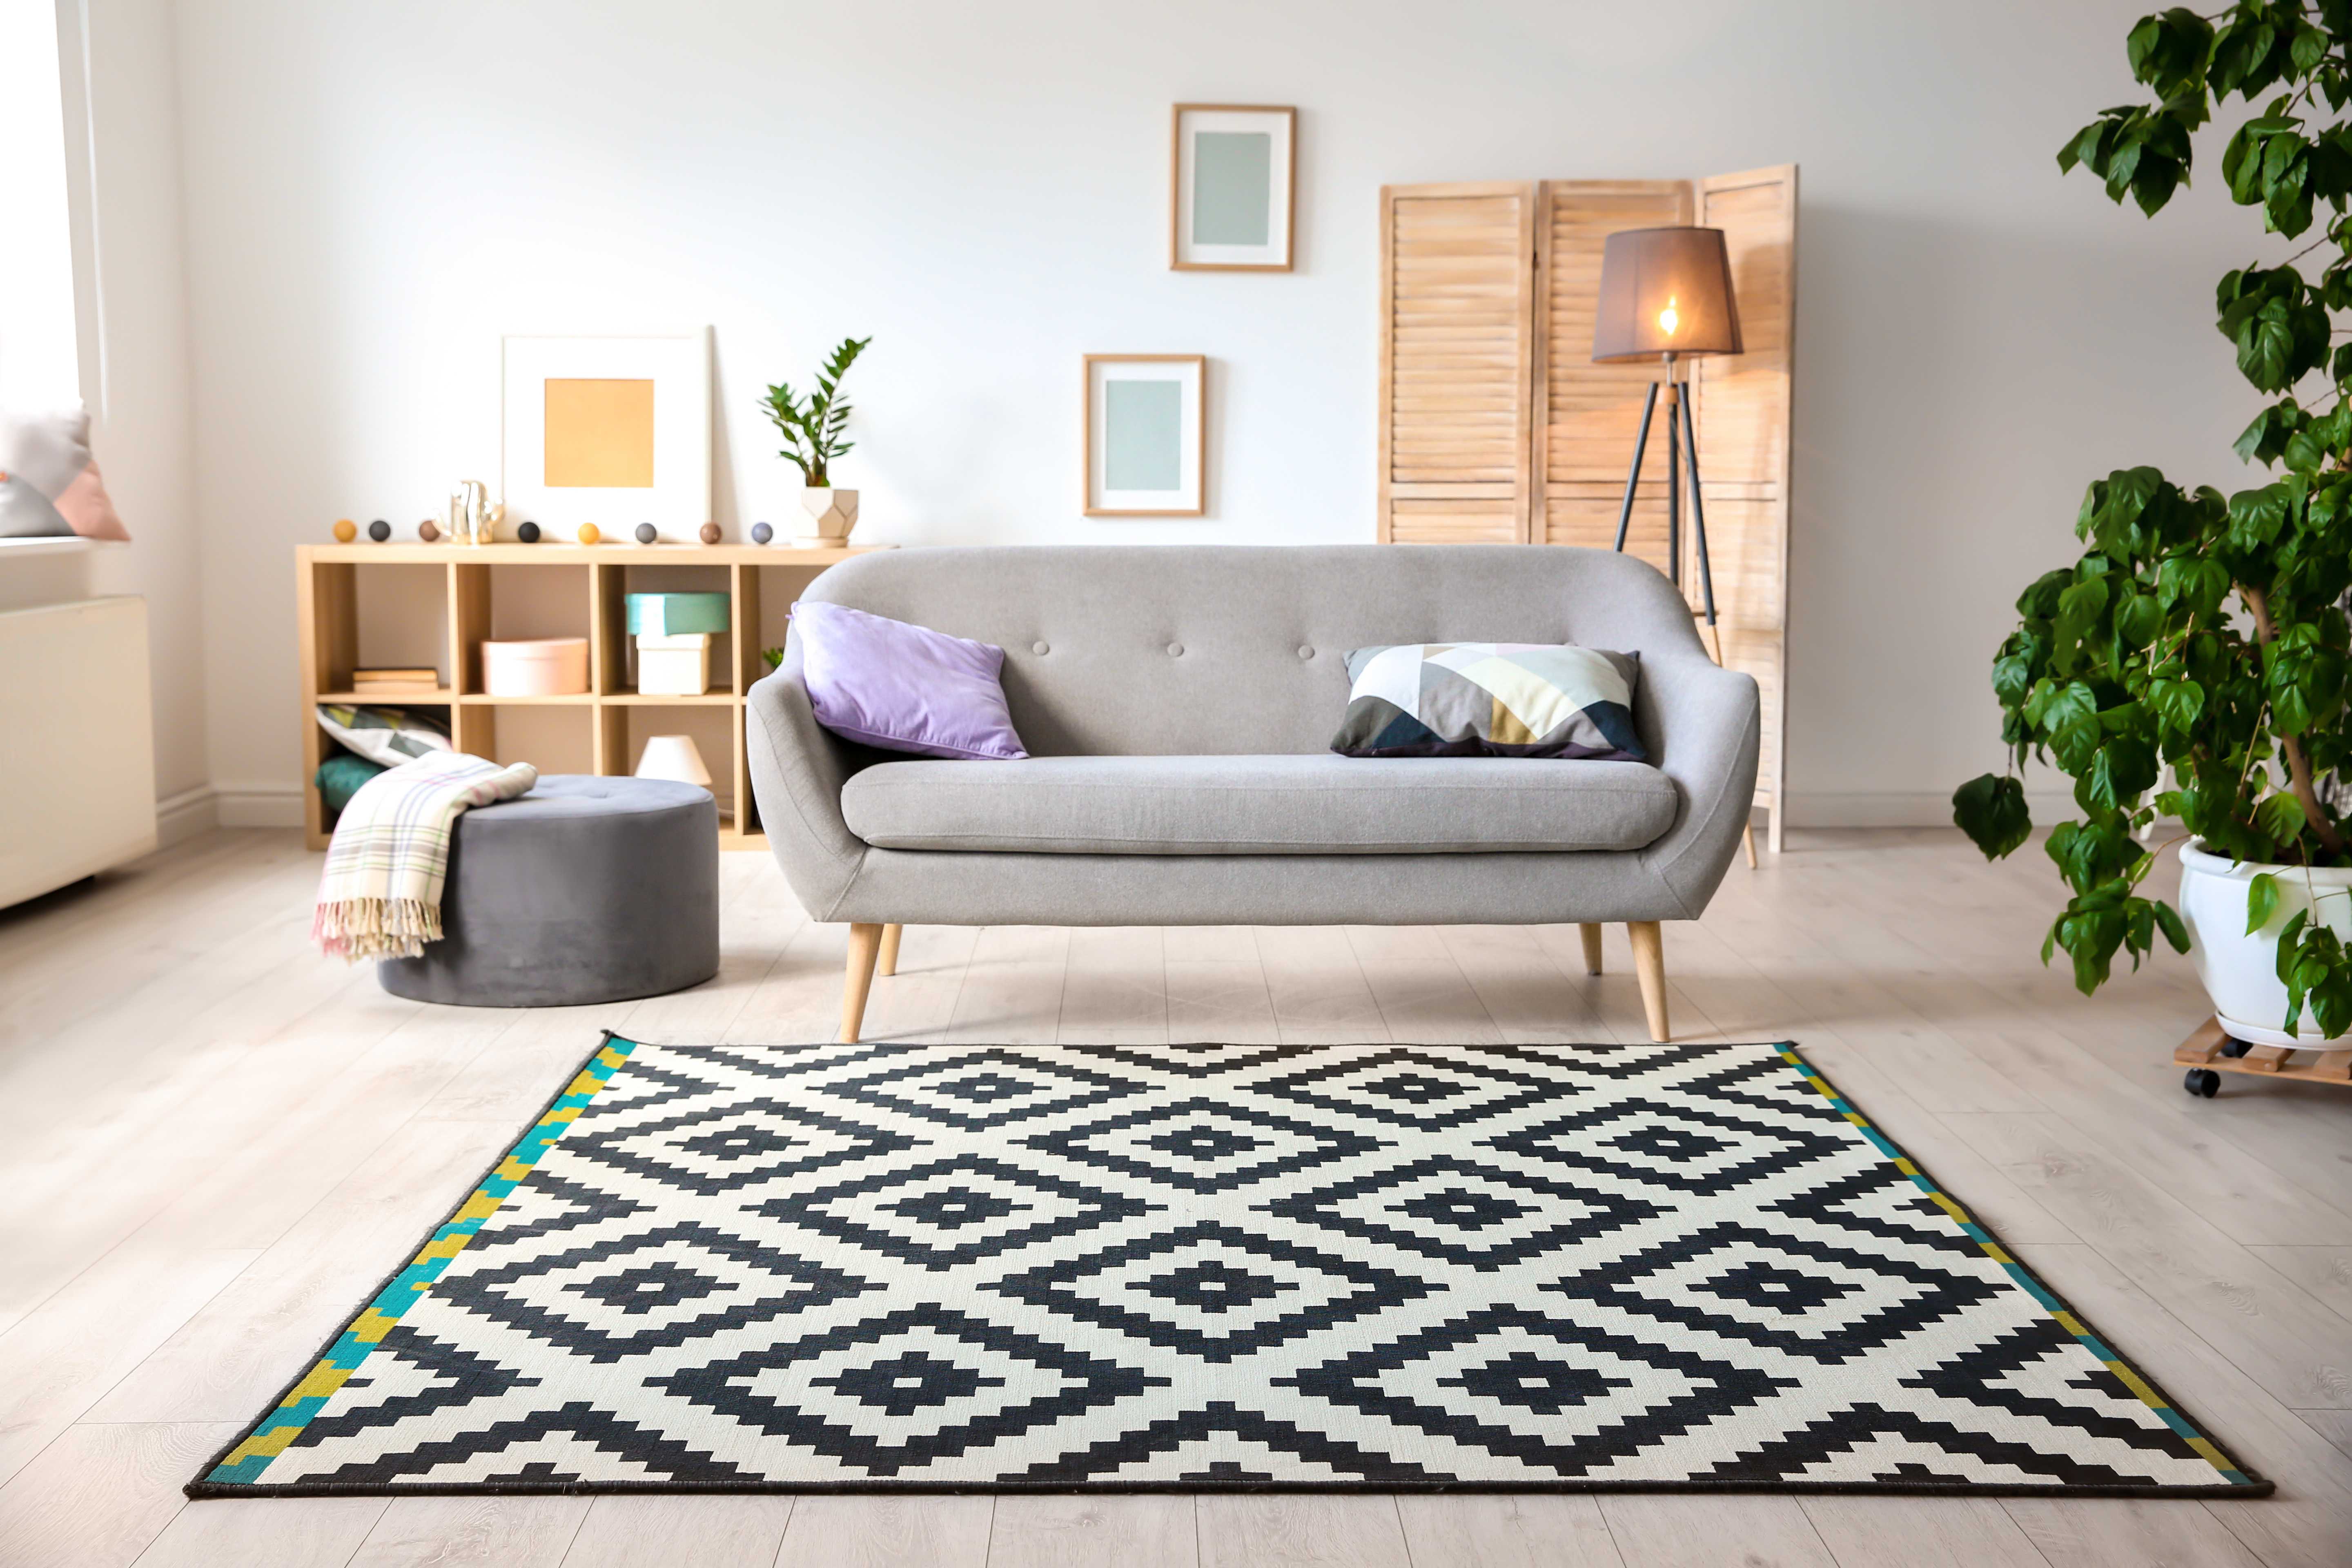 Rental property decorated with rug